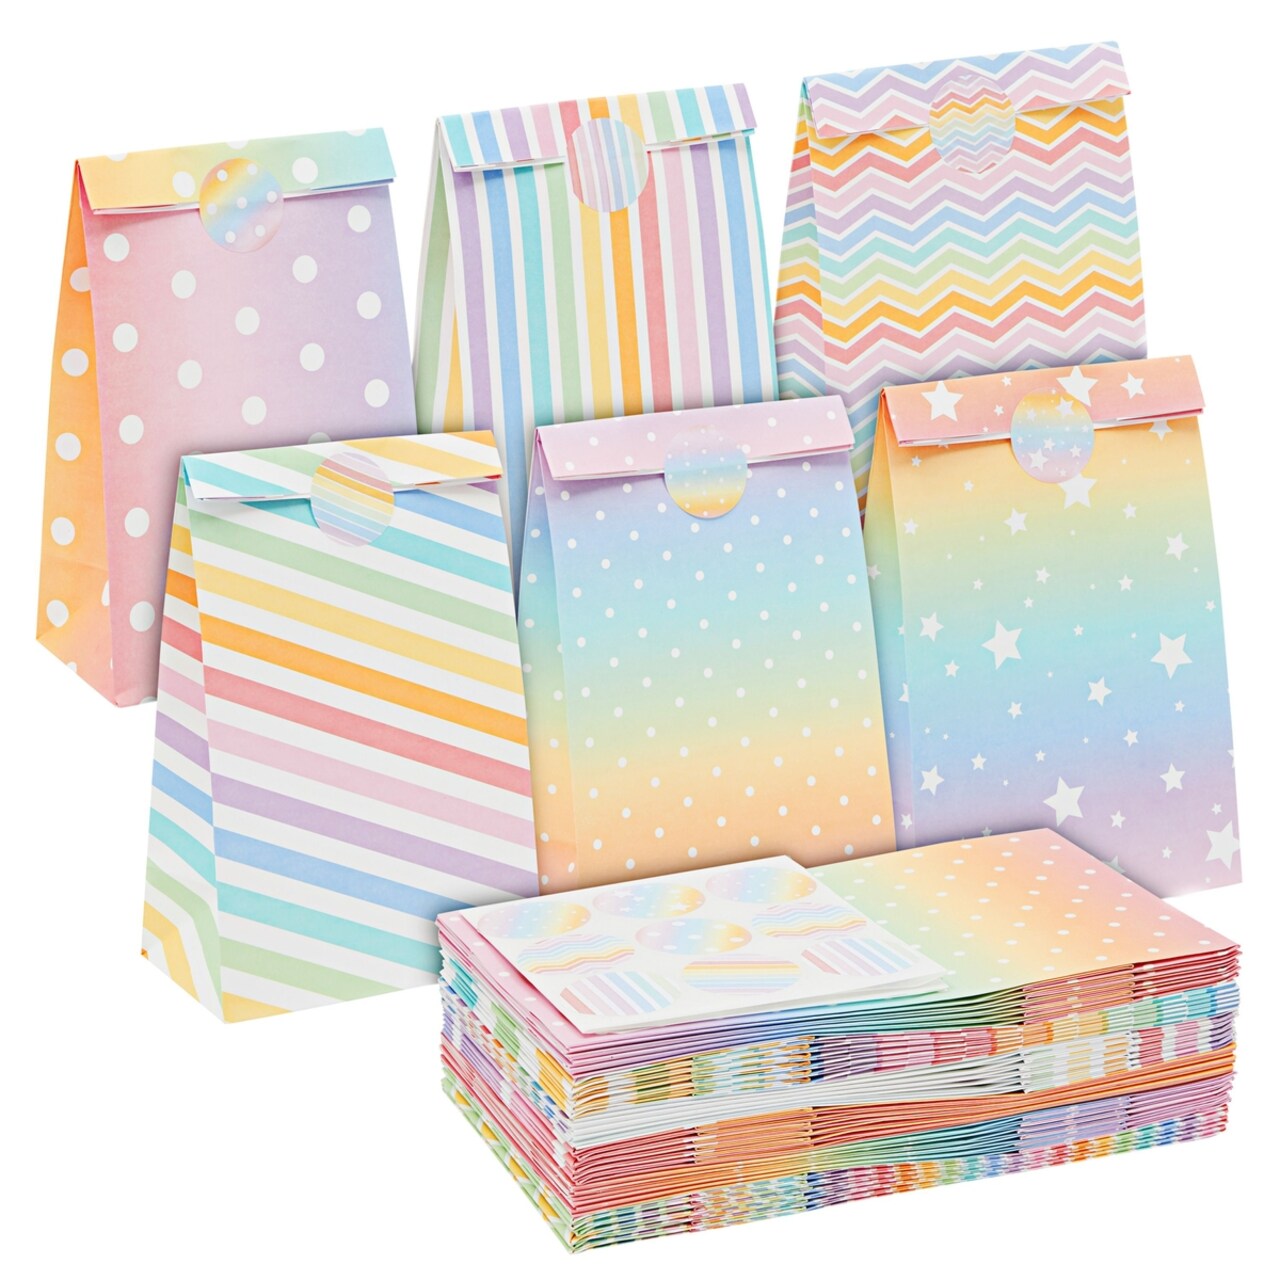 36-Pack Small Rainbow Party Favor Bags, 5.5x3.2x9-Inch Paper